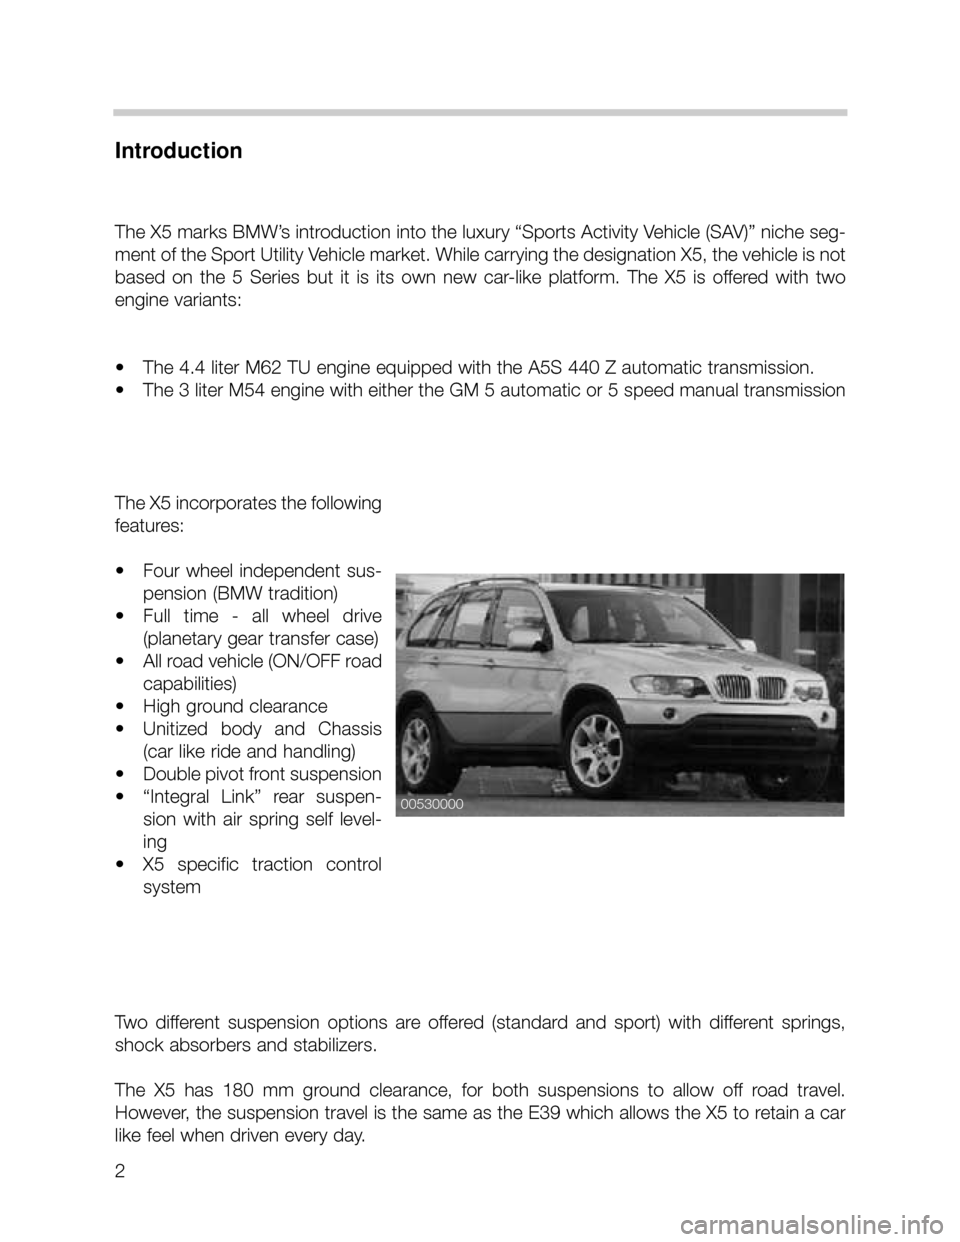 BMW X5 2005 E53 Workshop Manual 2
Introduction
The X5 marks BMW’s introduction into the luxury “Sports Activity Vehicle (SAV)” niche seg-
ment of the Sport Utility Vehicle market. While carrying the designation X5, the vehicle